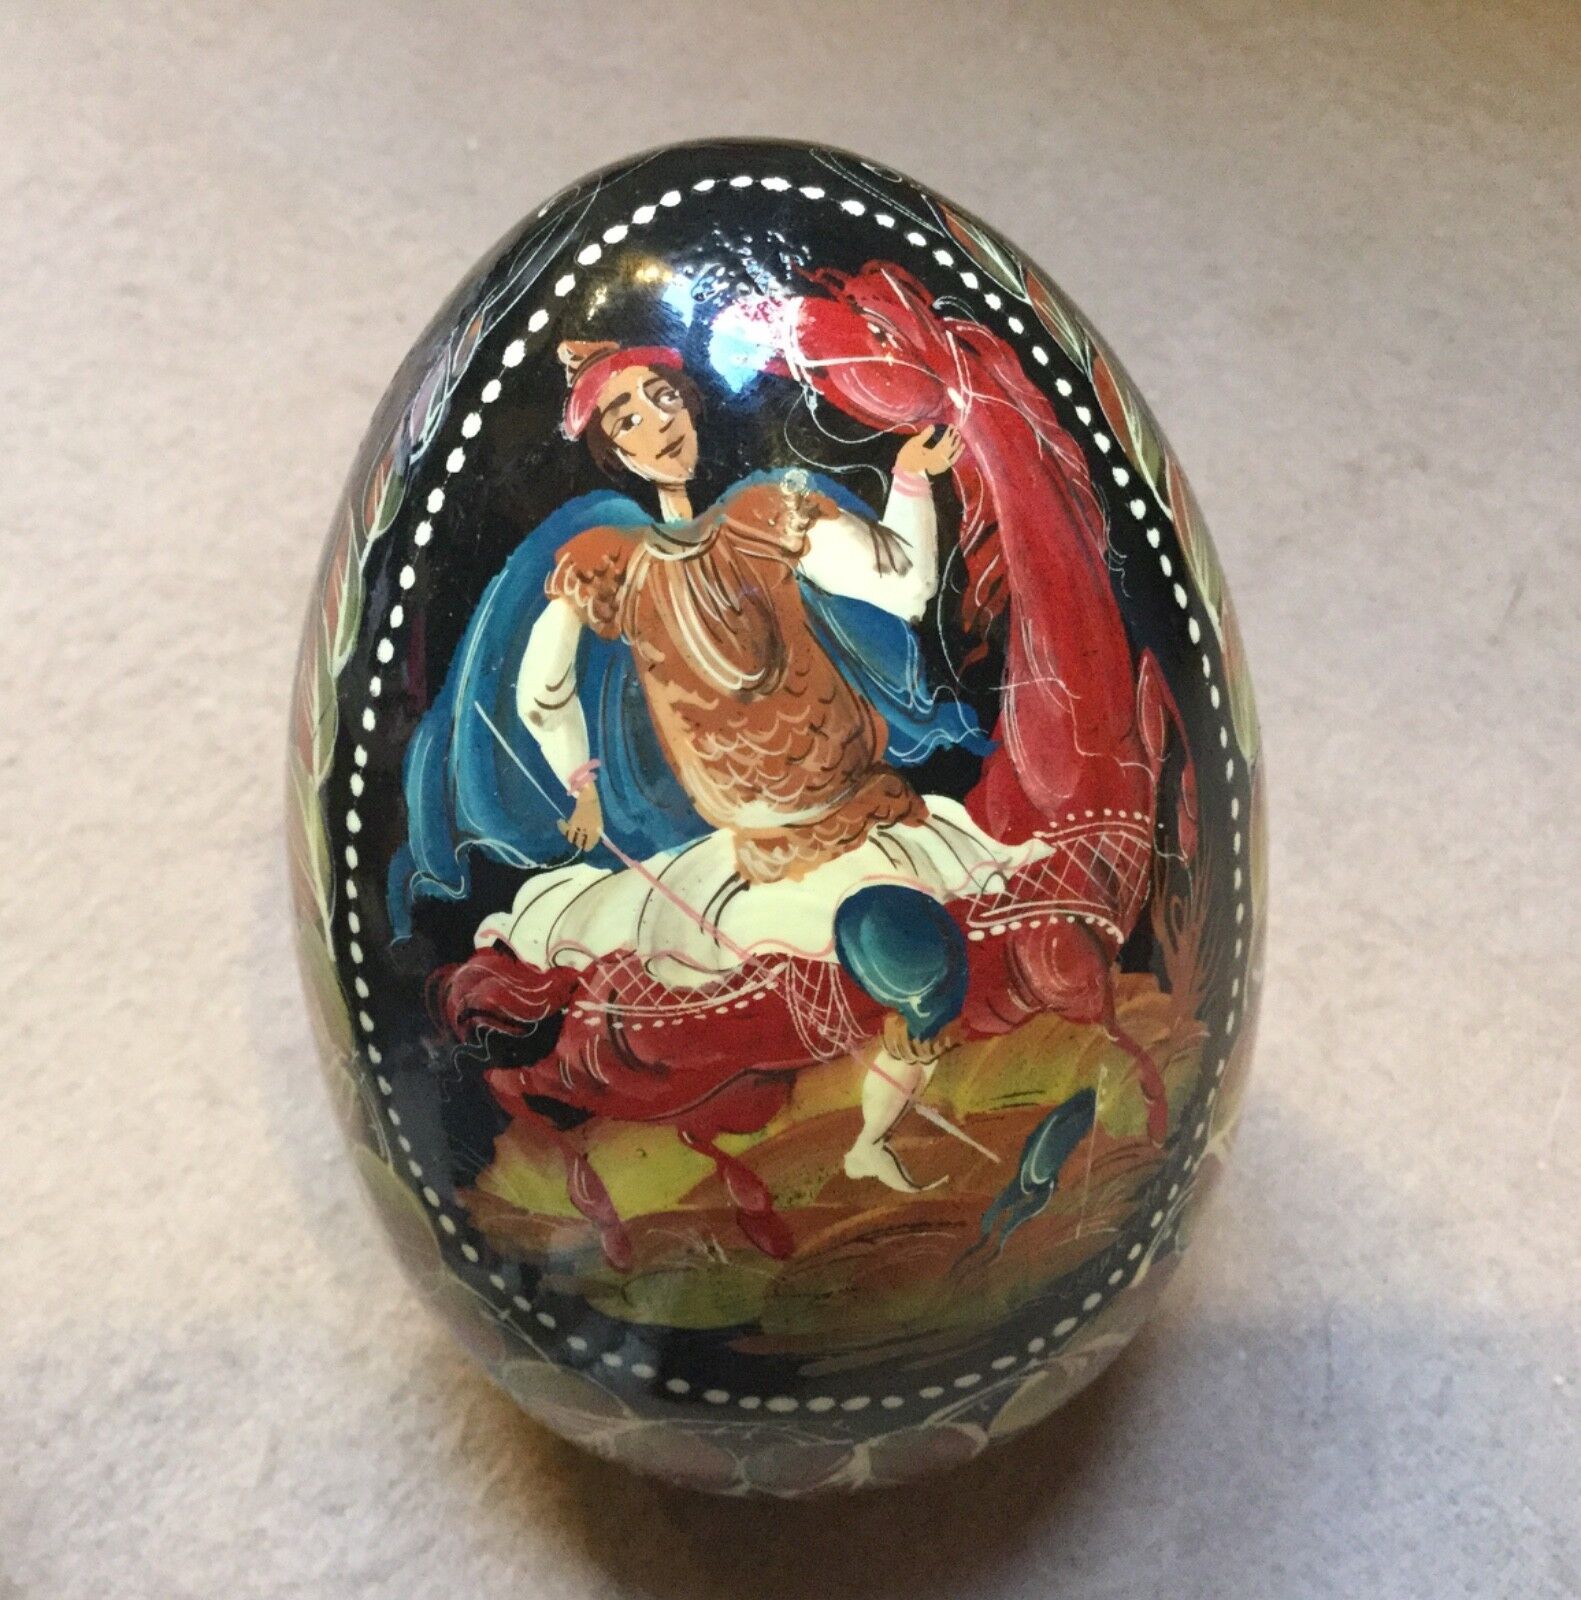 Beautiful Hand painted Russian Wooden Egg Fairytale Figure Signed  4” Tall #49